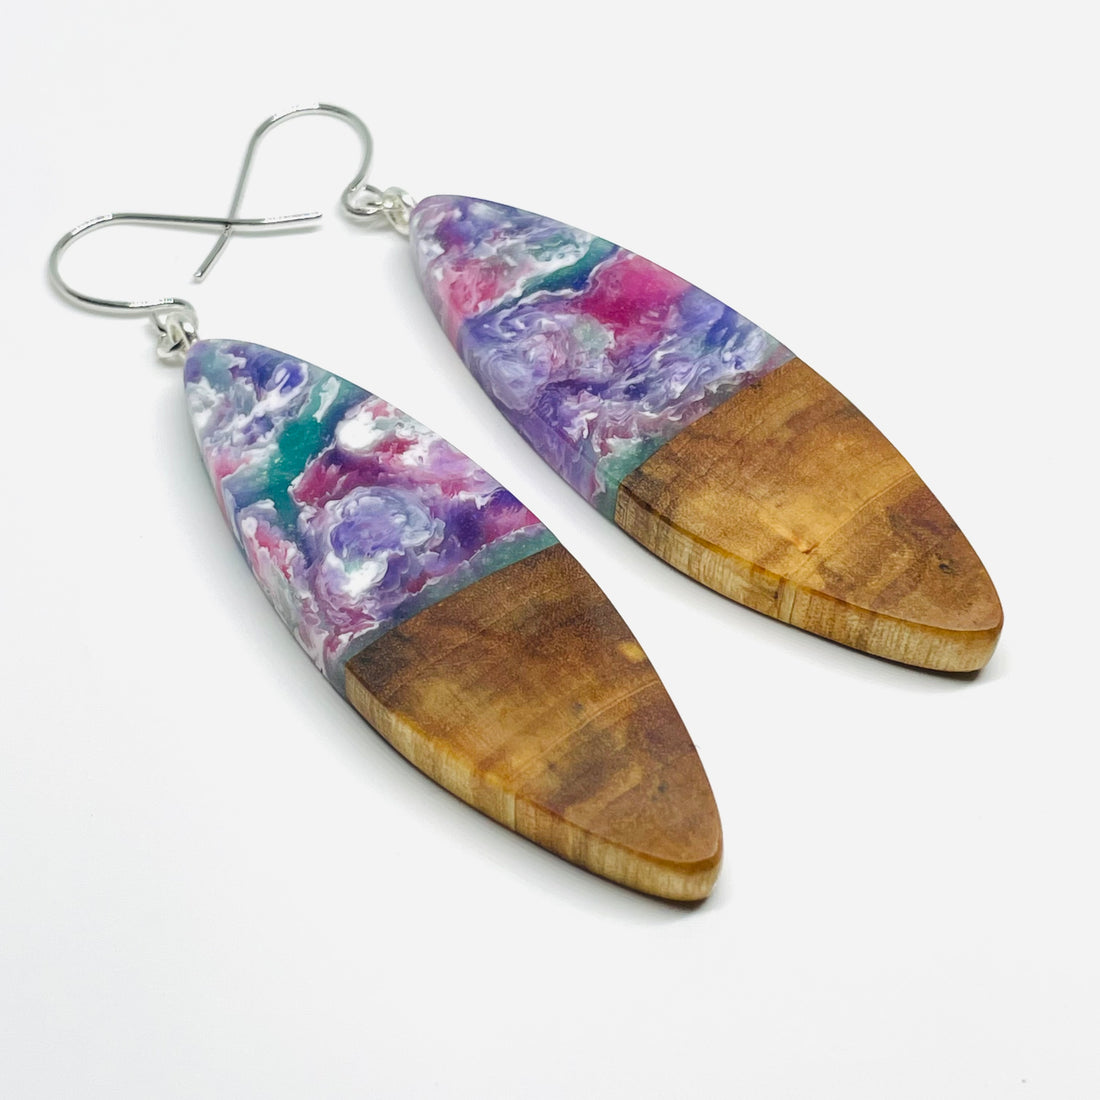 handmade jewelry, Minnesota local wood and resin artist. Red, green, purple, white resin with maple wood, nickel free dangle earrings sliver shaped